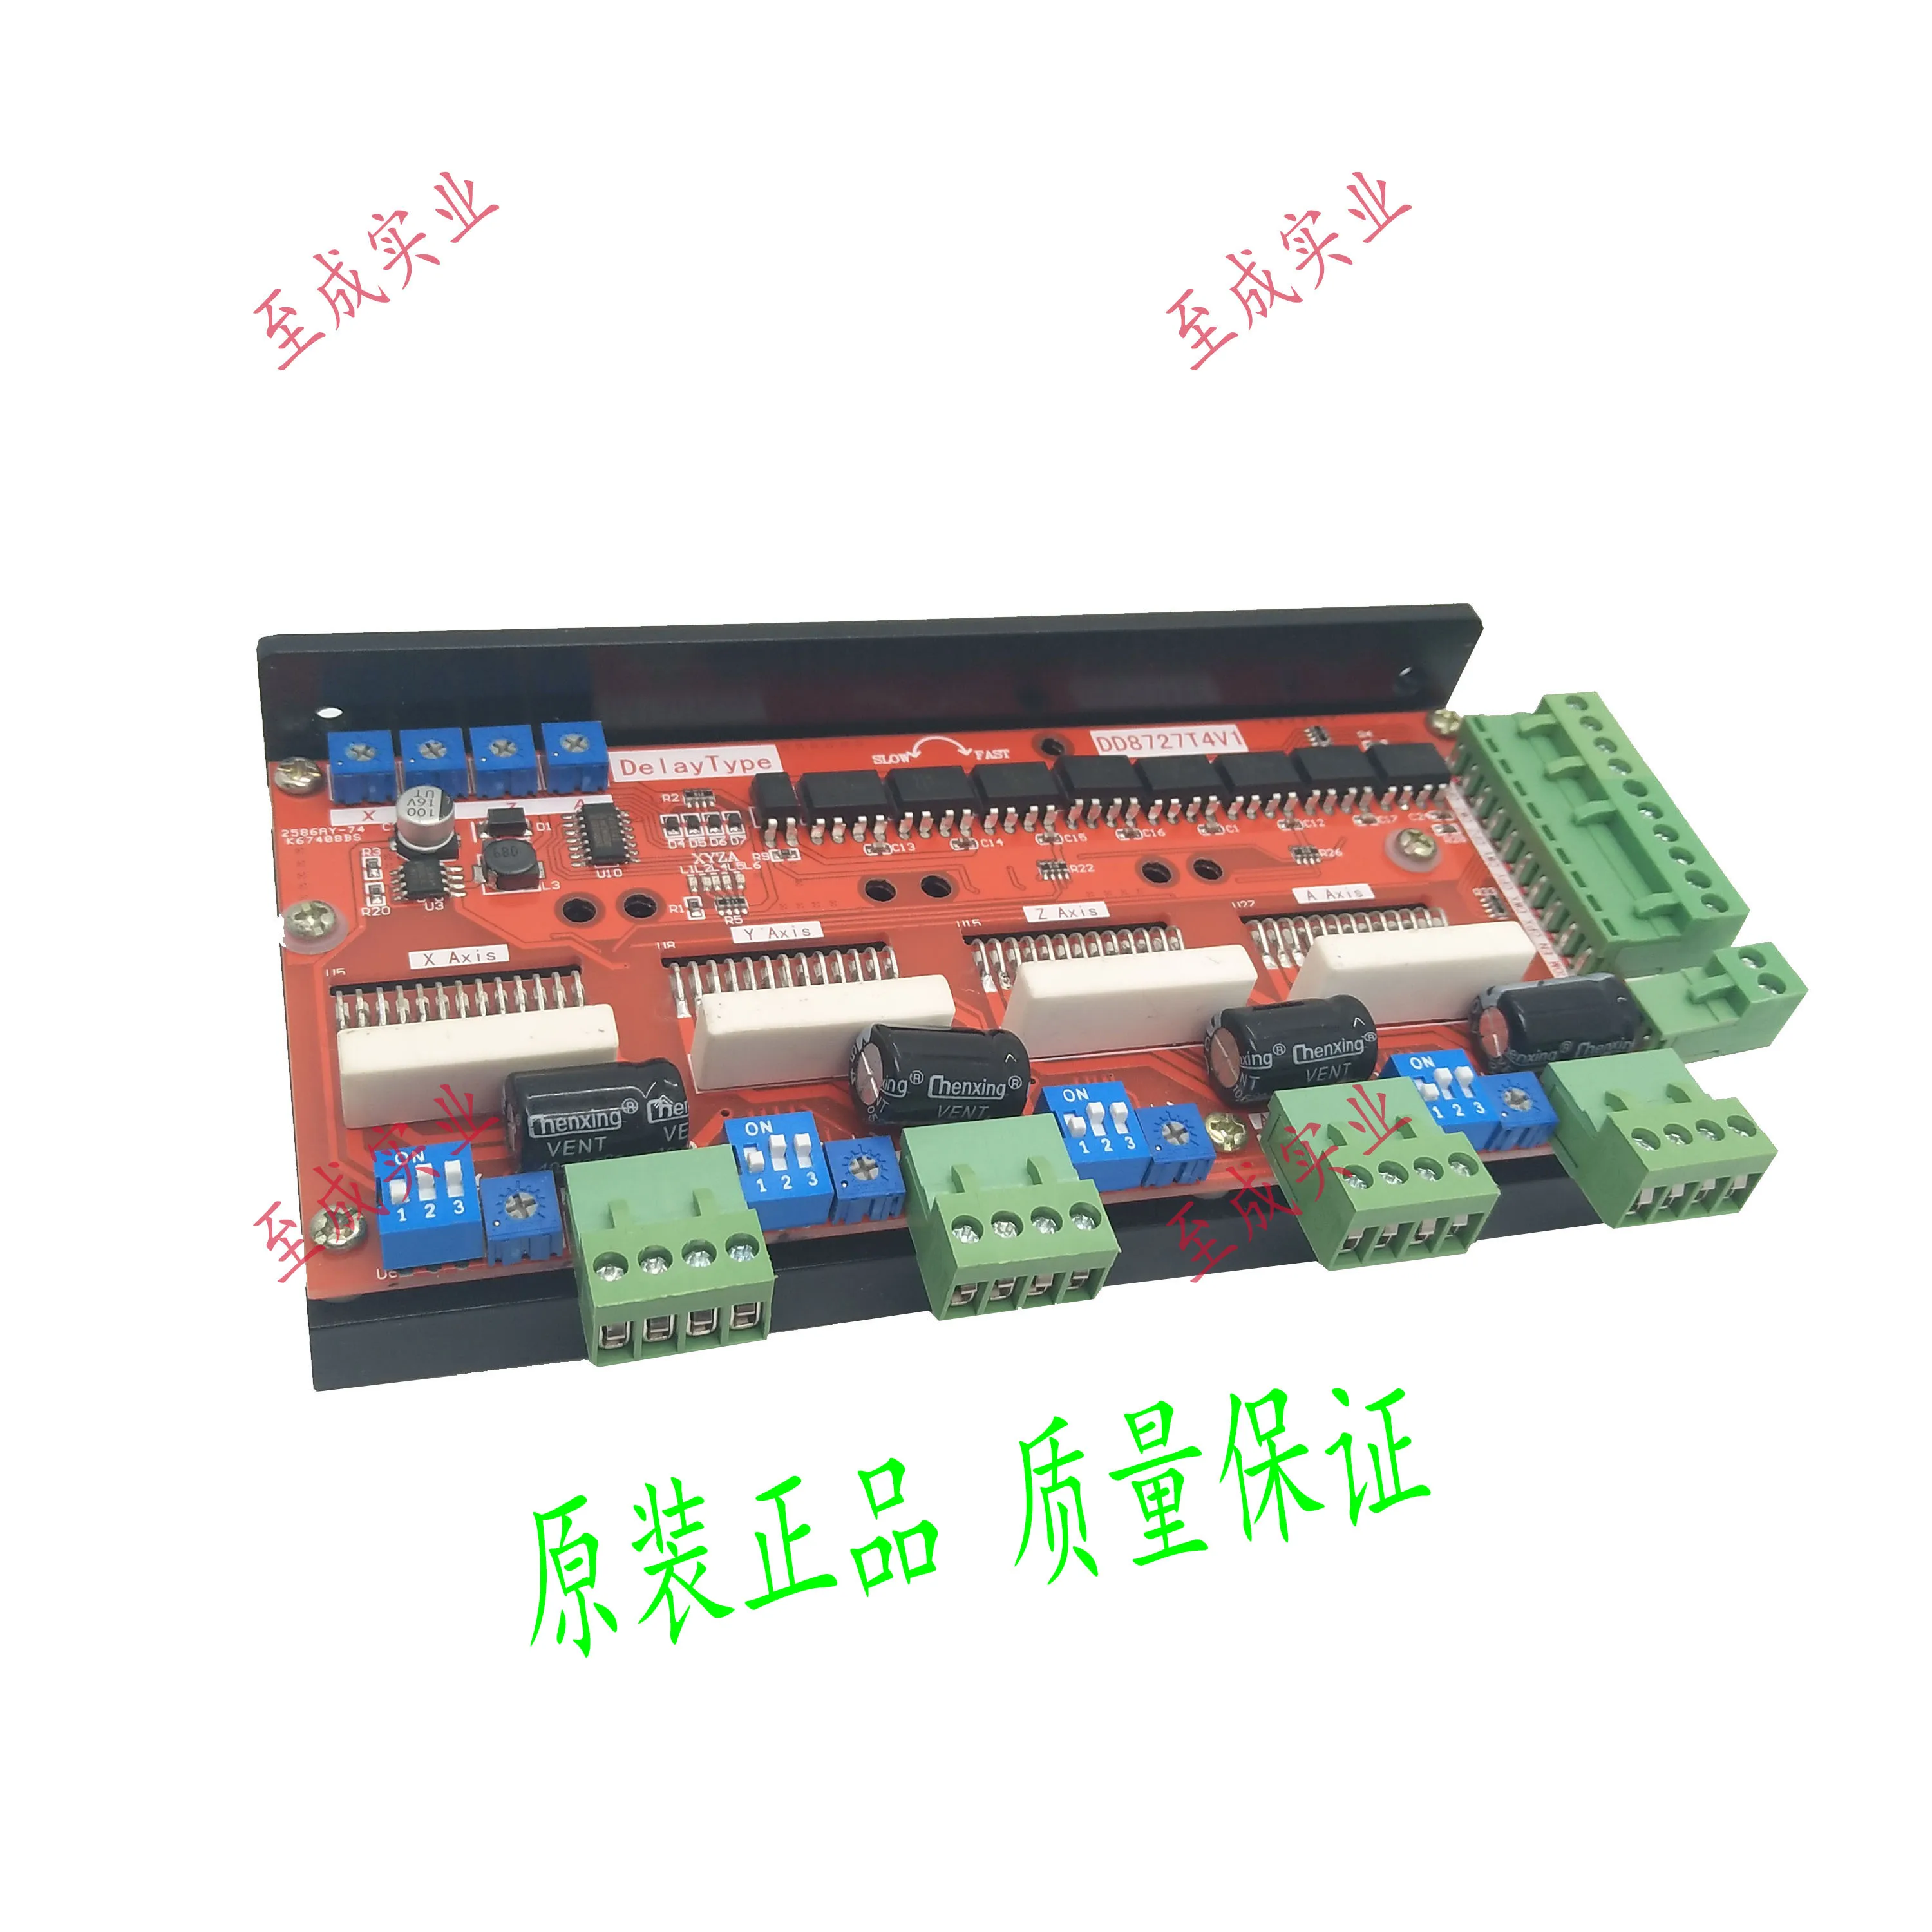 

Newly designed 4-axis 5-axis 2-phase stepper motor driver 4A128 subdivision LV8727 DD8727T5V1